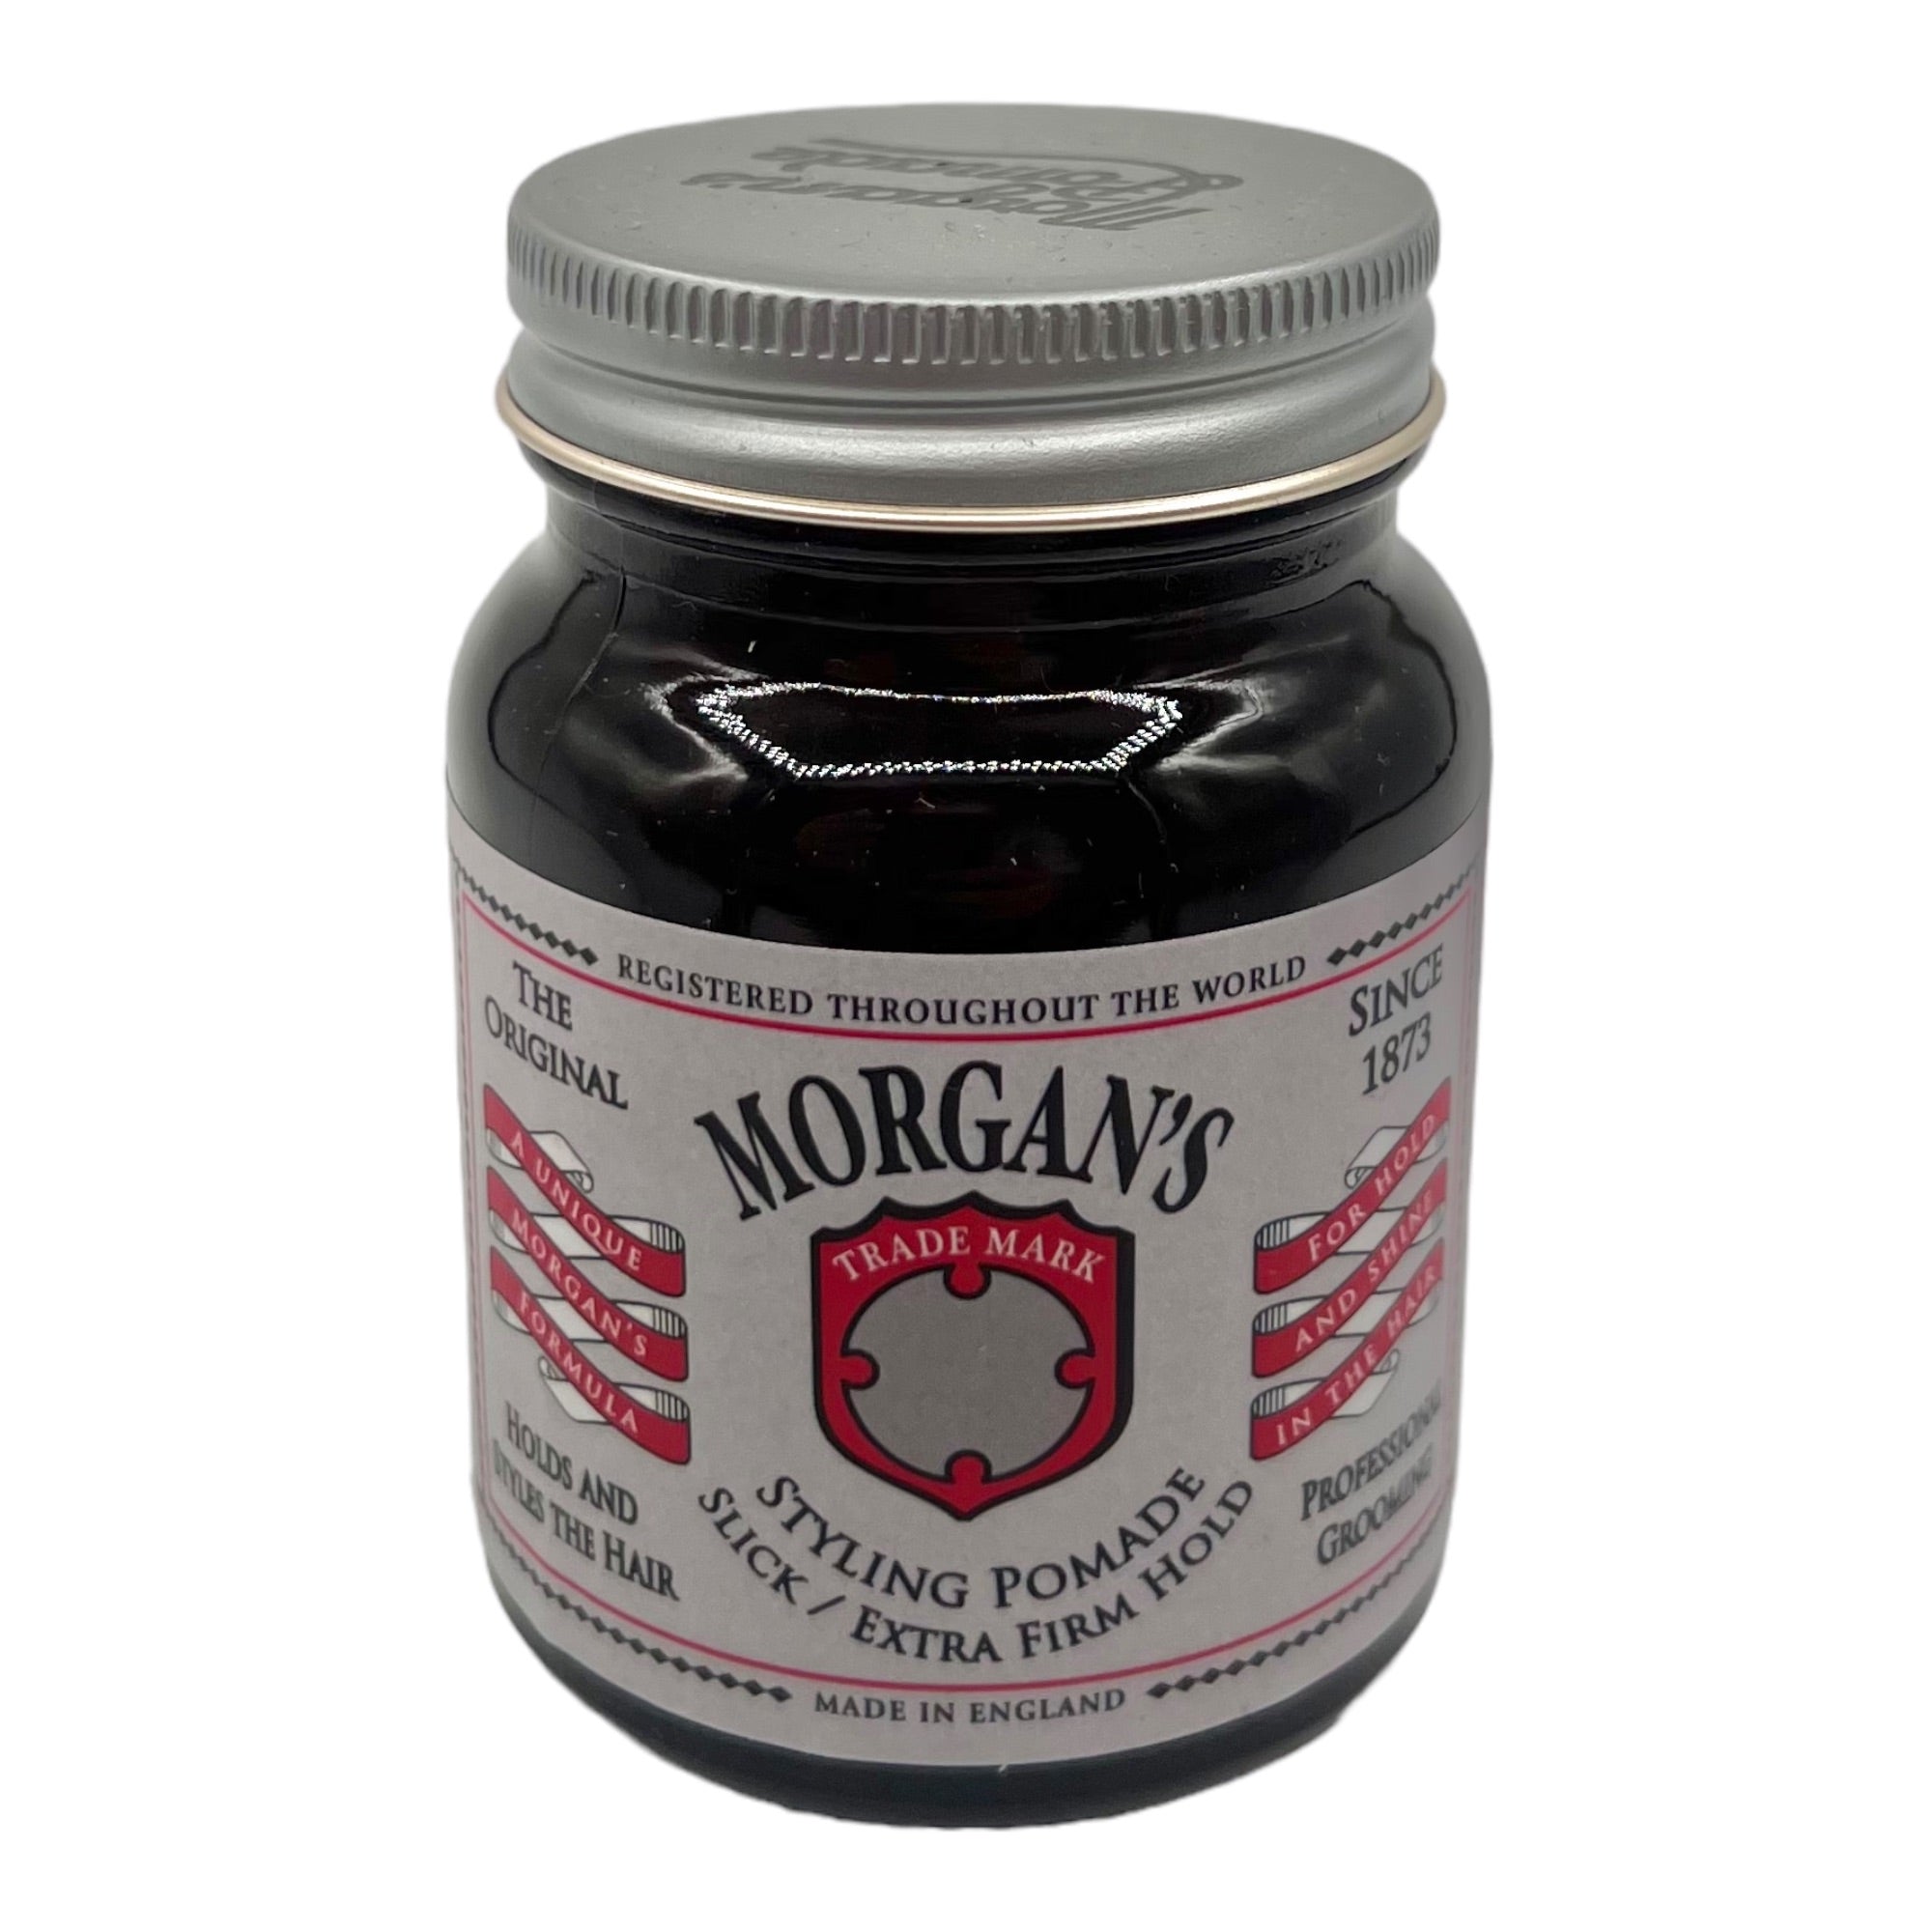 Morgan's - Styling Pomade Slick Extra Firm Hold 100g